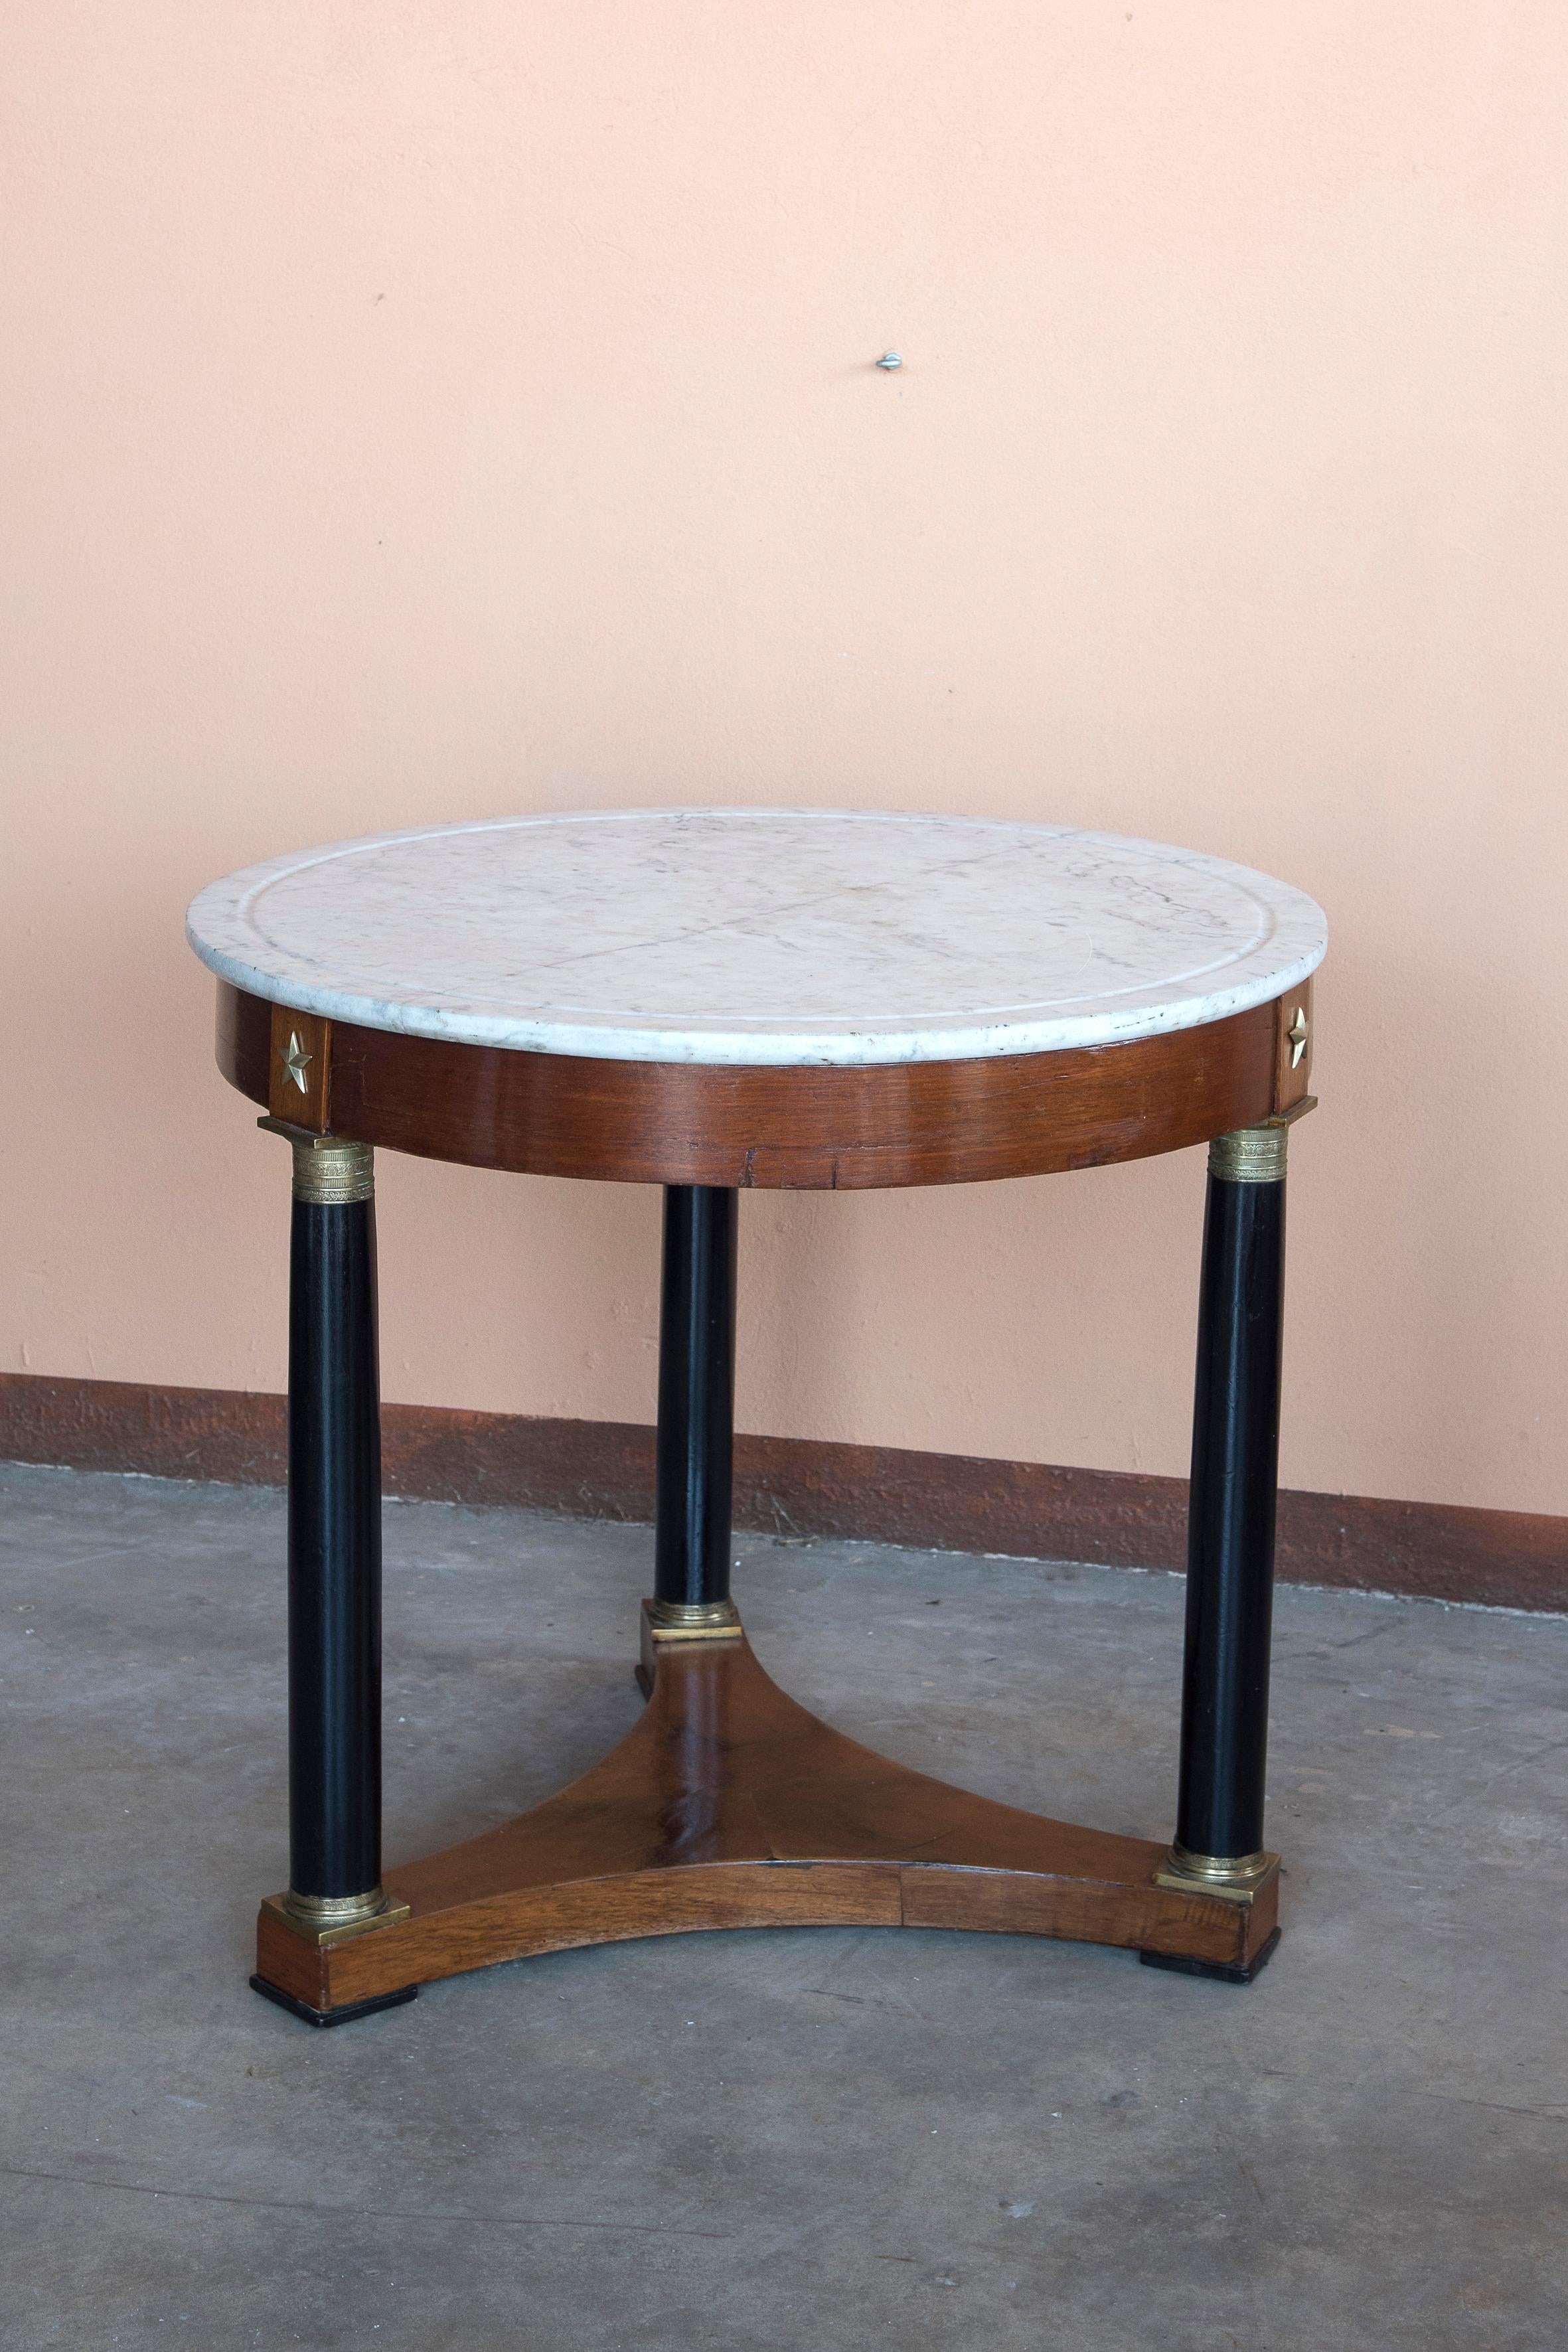 Italian French Empire Walnut Wood Rounded Coffee Table White Marble from Carrara Top For Sale